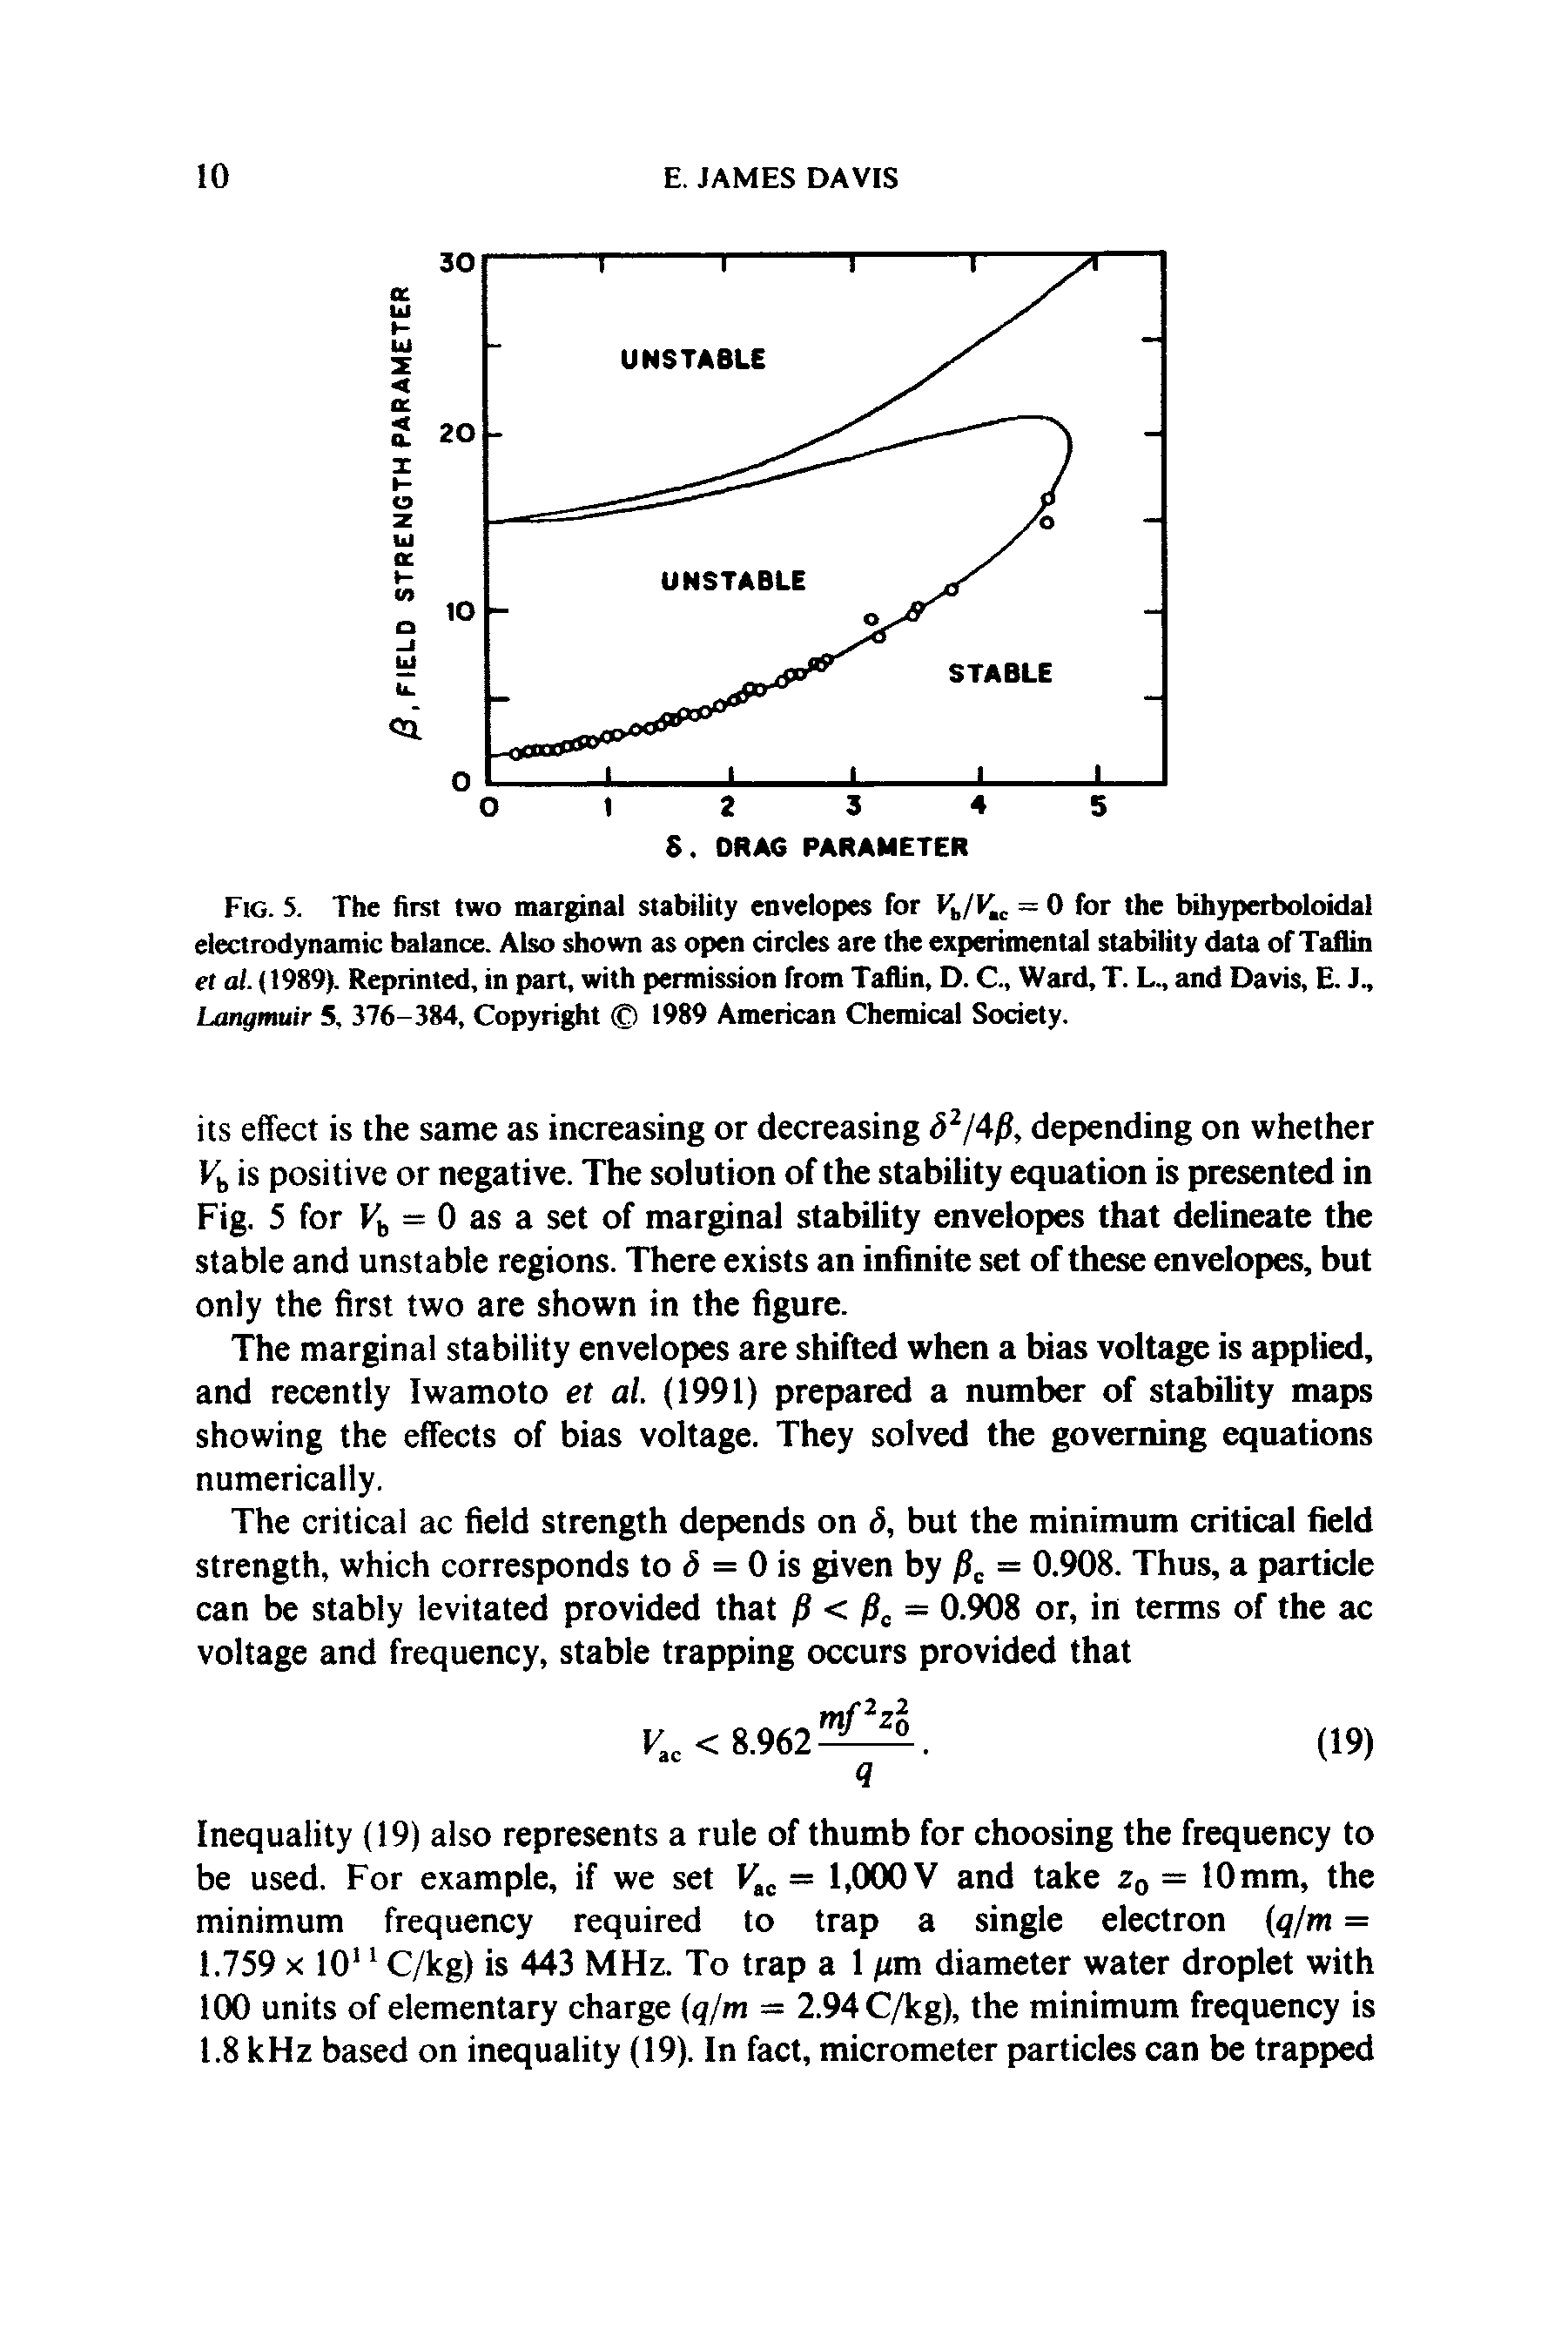 Fig. 5. The first two marginal stability envelopes for VJV = 0 for the bihyperboloidal electrodynamic balance. Also shown as open circles are the experimental stability data of Taflin et a/. (1989). Reprinted, in part, with permission from Taflin, D. C, Ward, T. L., and Davis, E. J., Langmuir 5, 376-384, Copyright 1989 American Chemical Society.